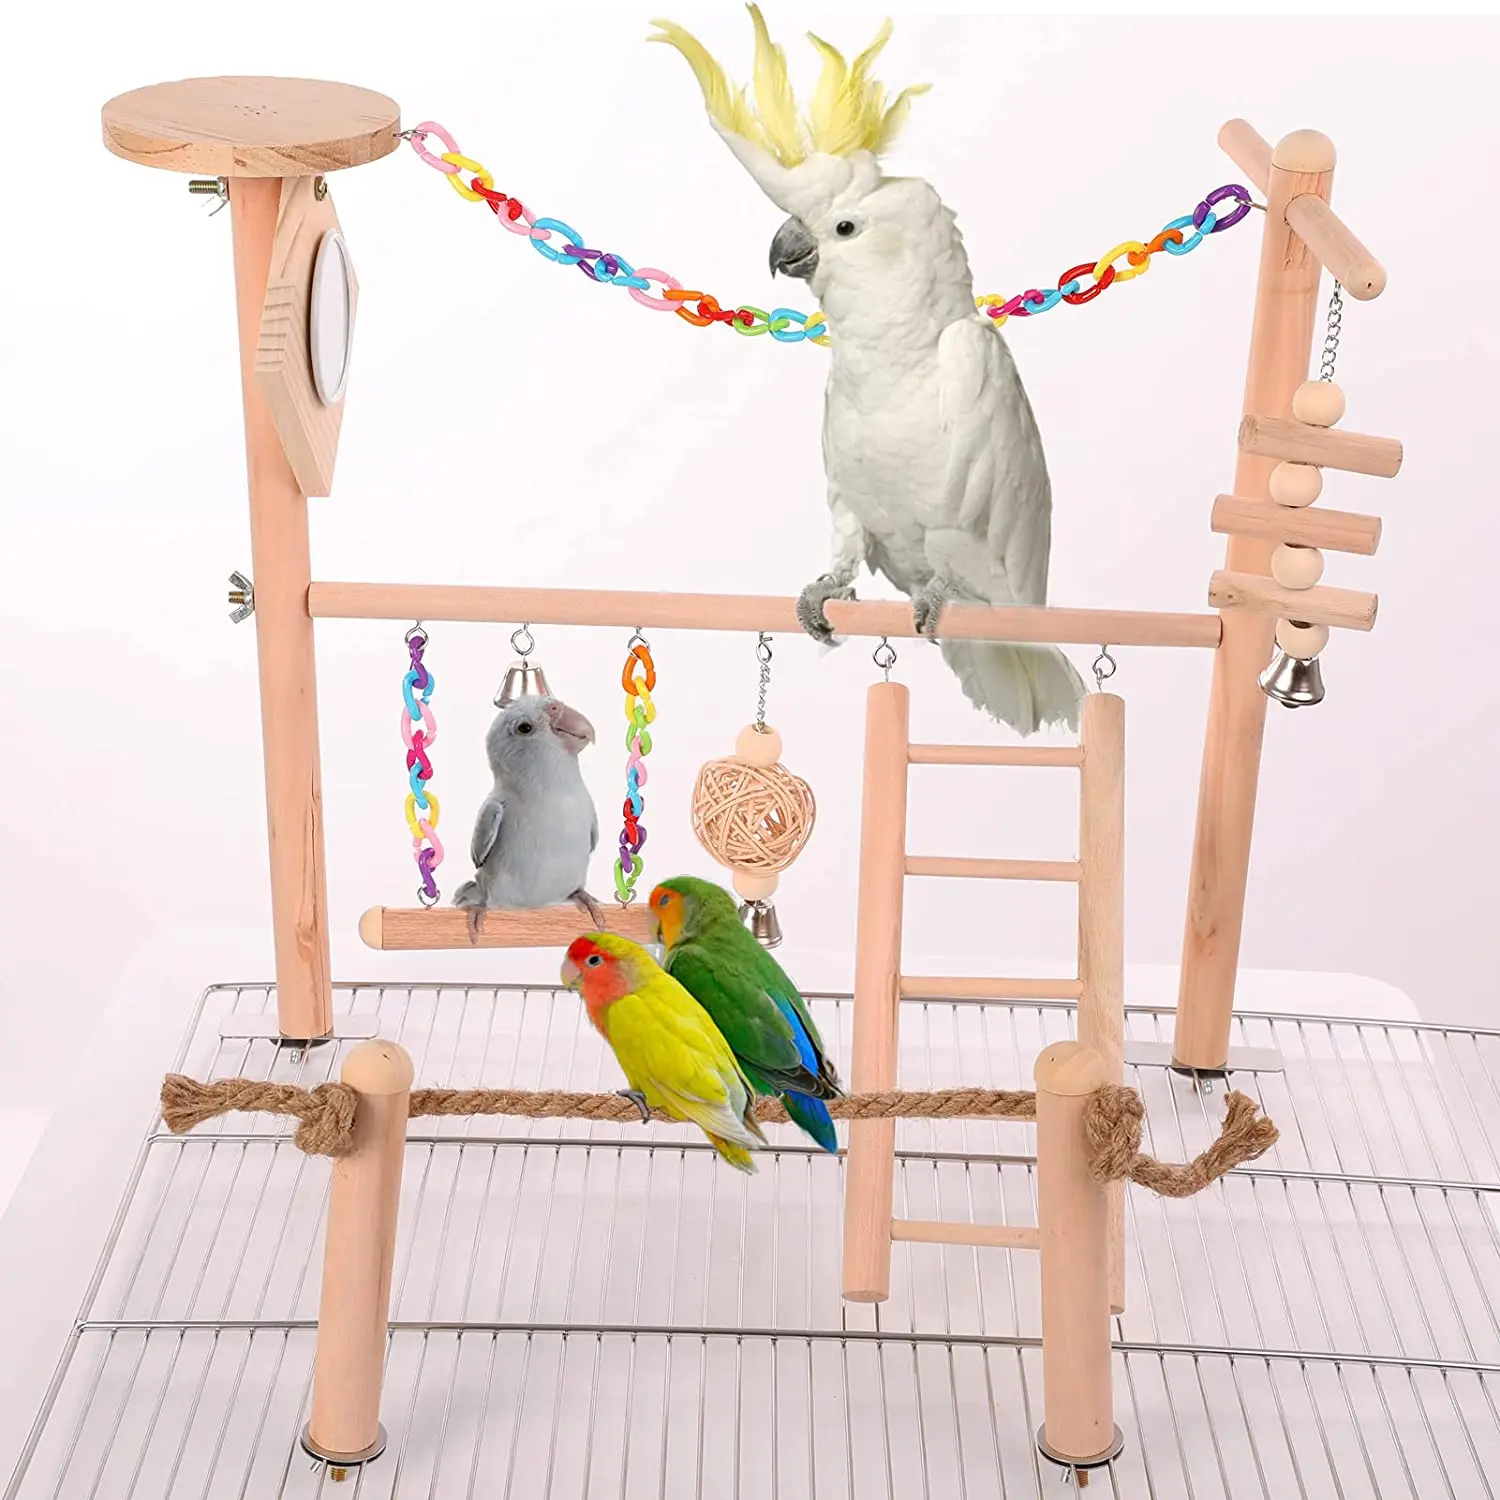 

Bird Cage Play Stand Toy Set, Bird Playground Gym Hanging Chewing Toys Ladder Swing Accessories for Conure, Parakeets, Budgie